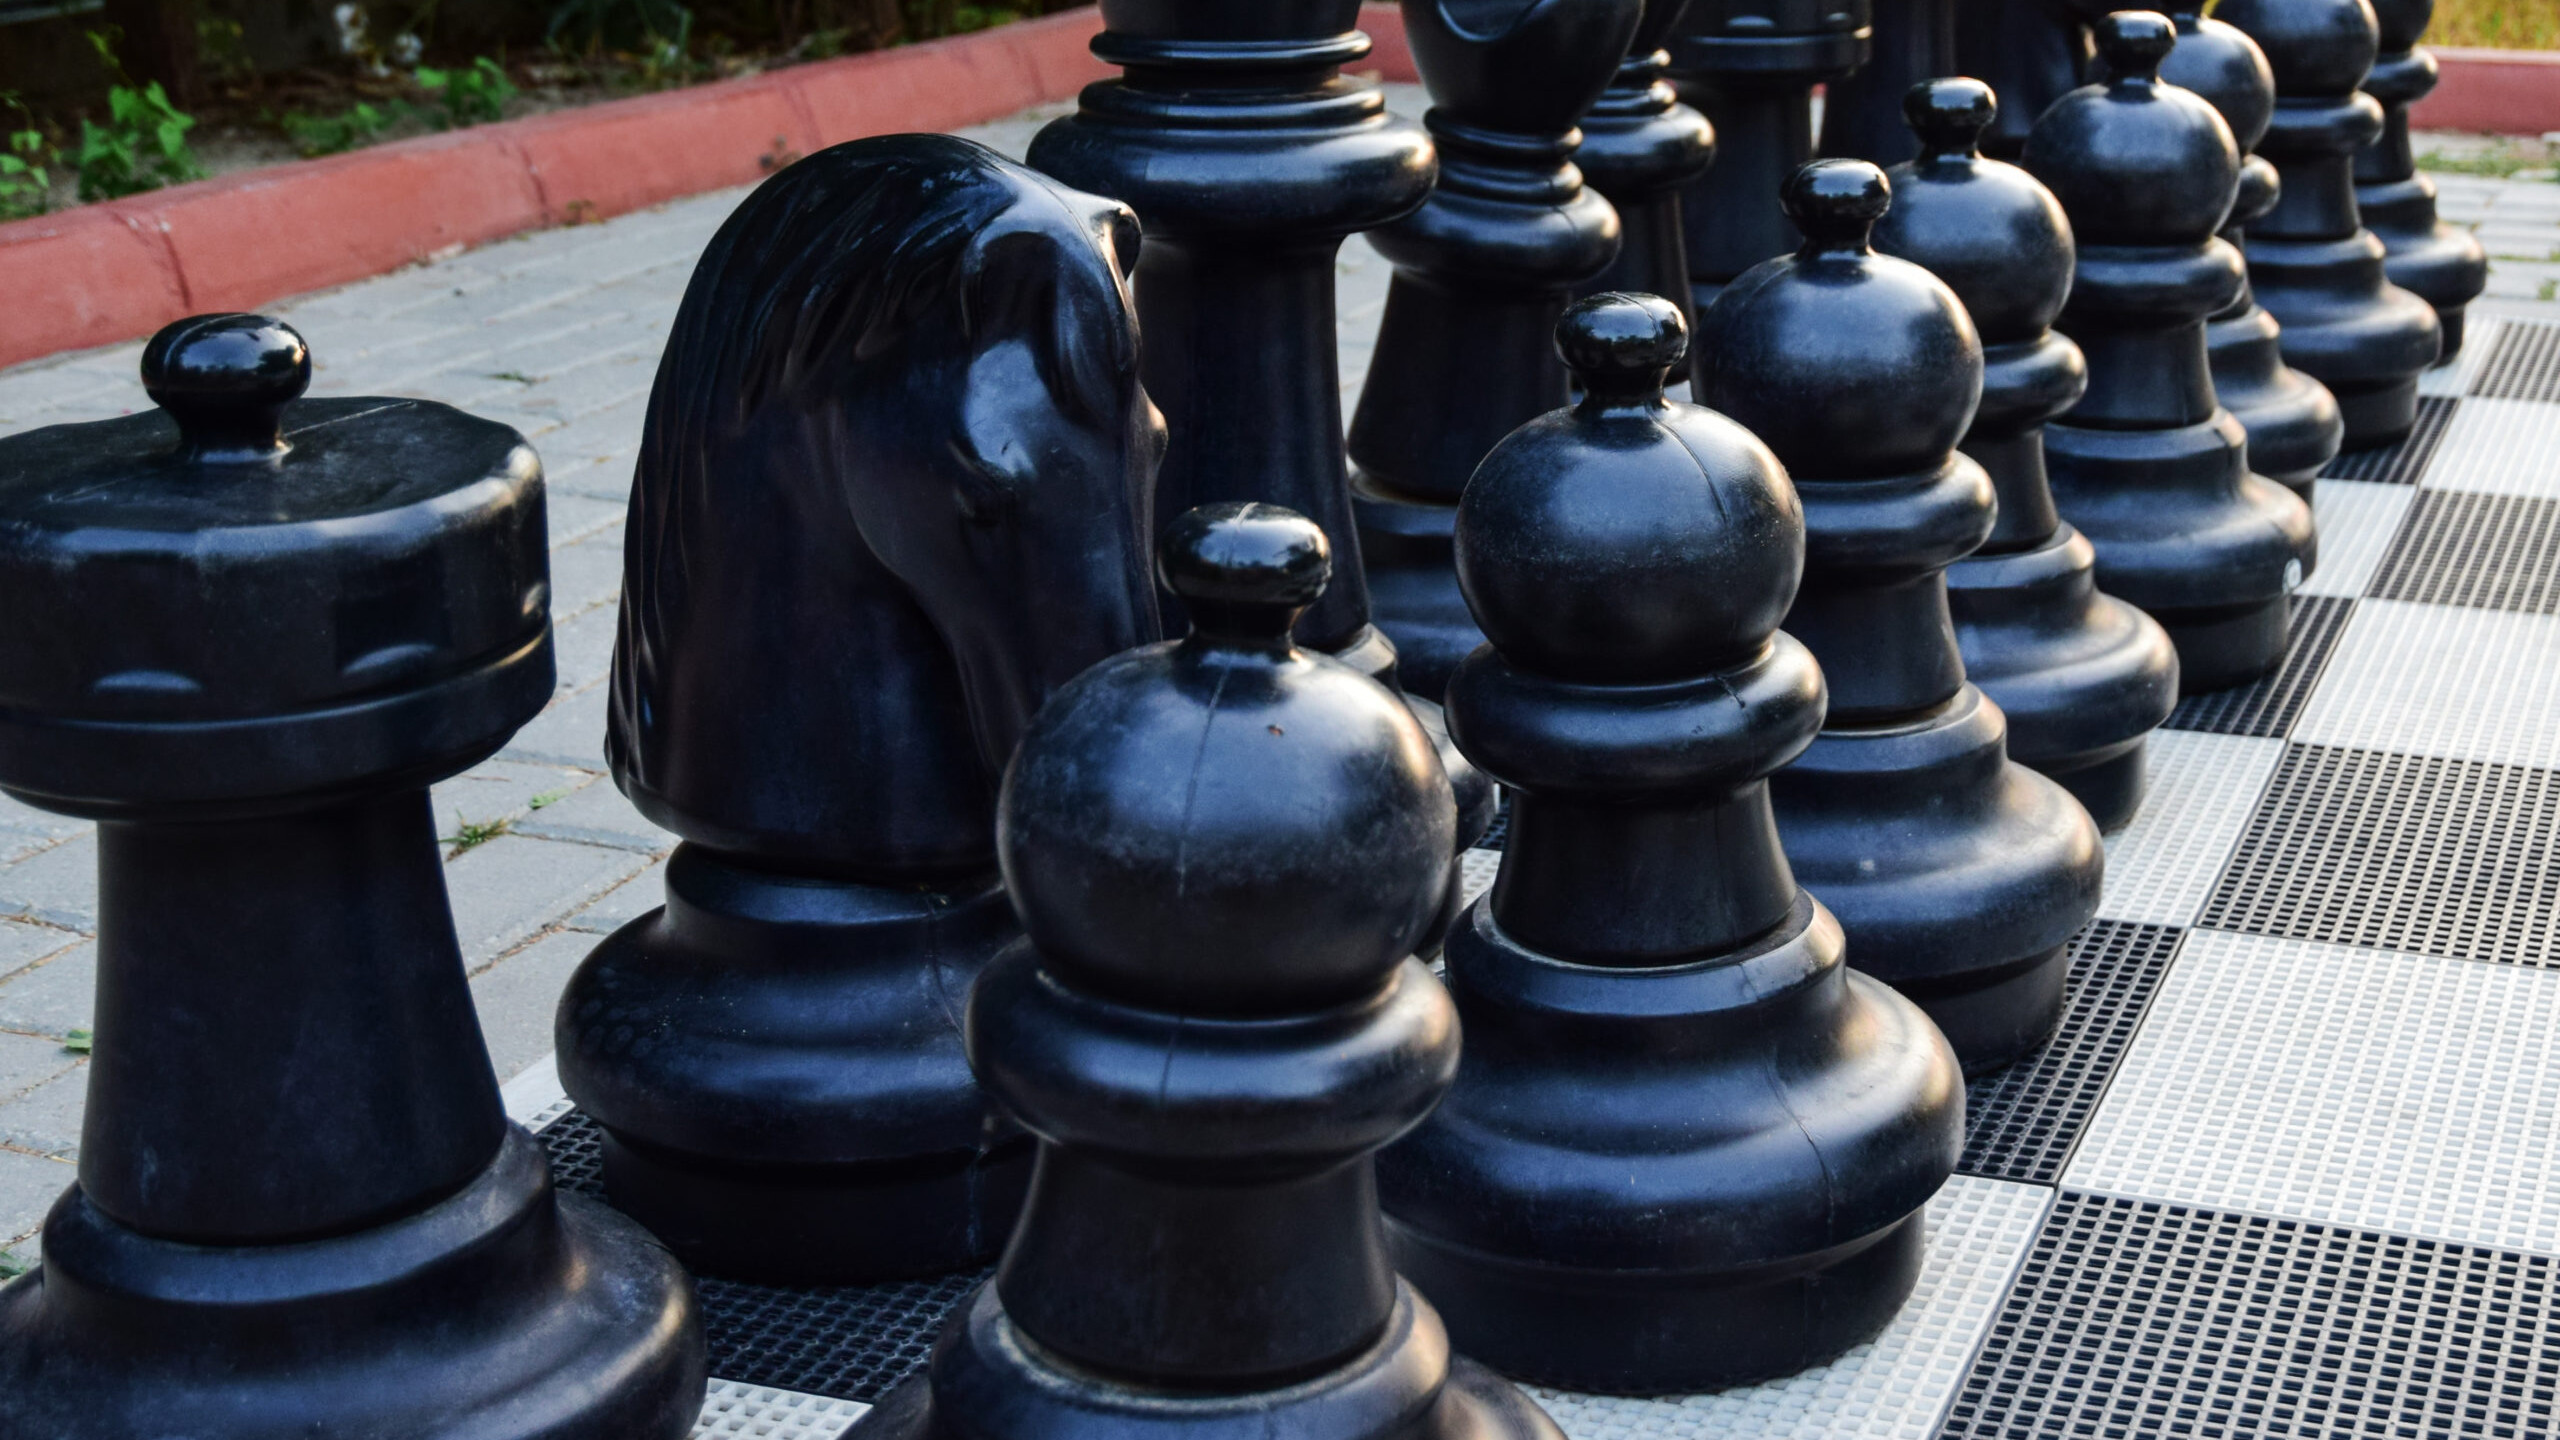 Life size chess game pieces set up outside on a checkered chess floor.